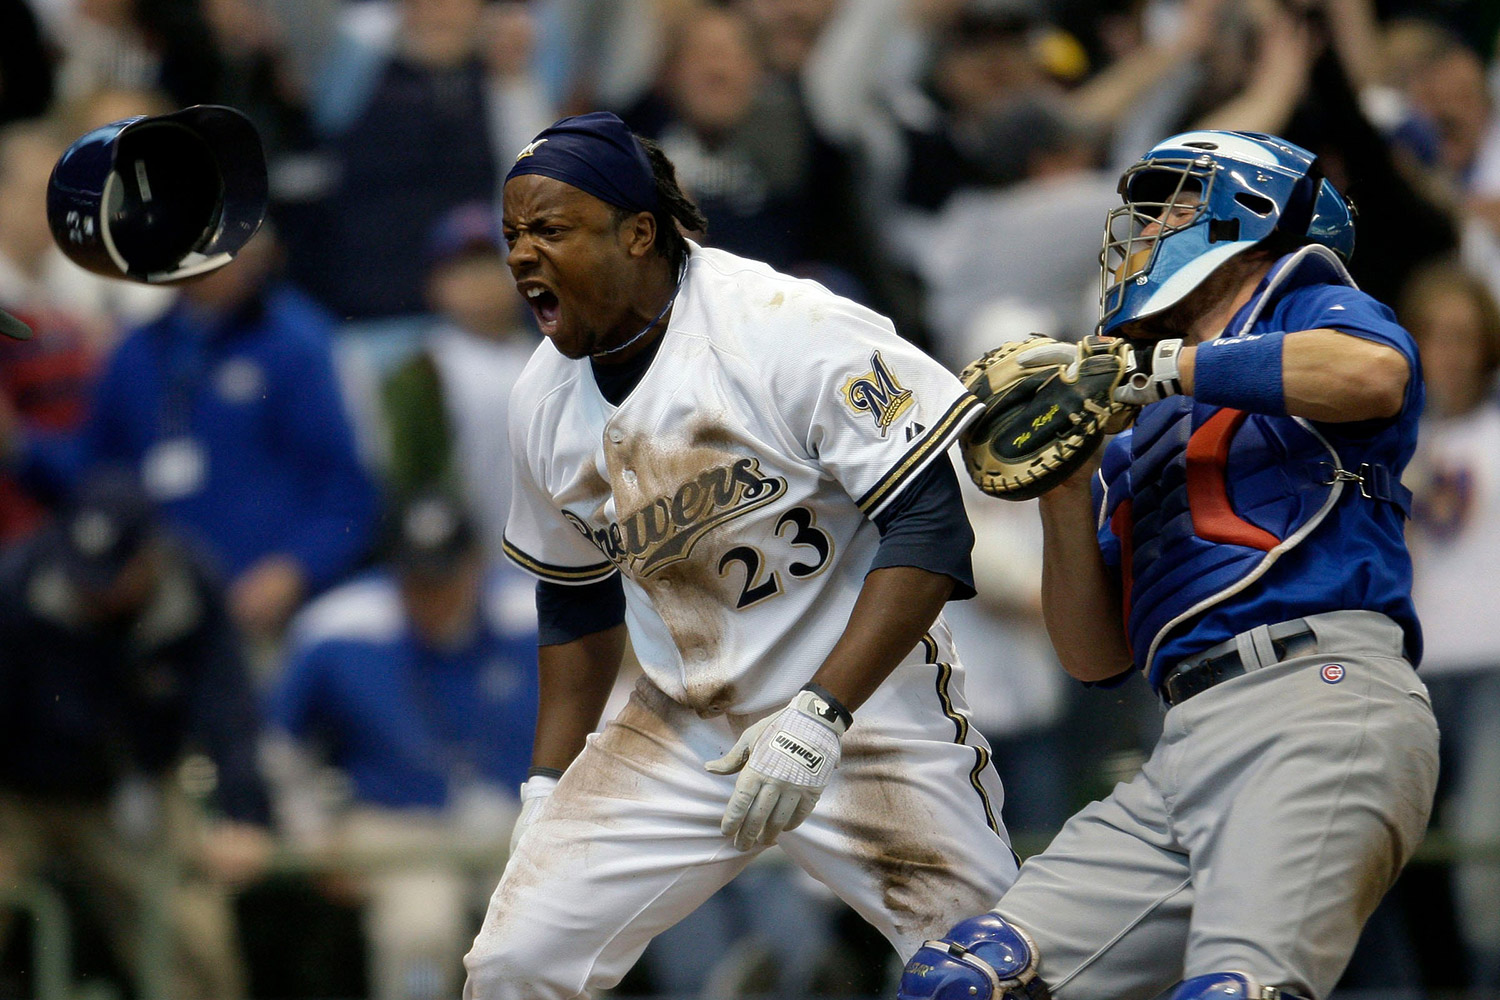 Prince Fielder, the Most Feared Hitter in Brewer History - Brewers - Brewer  Fanatic